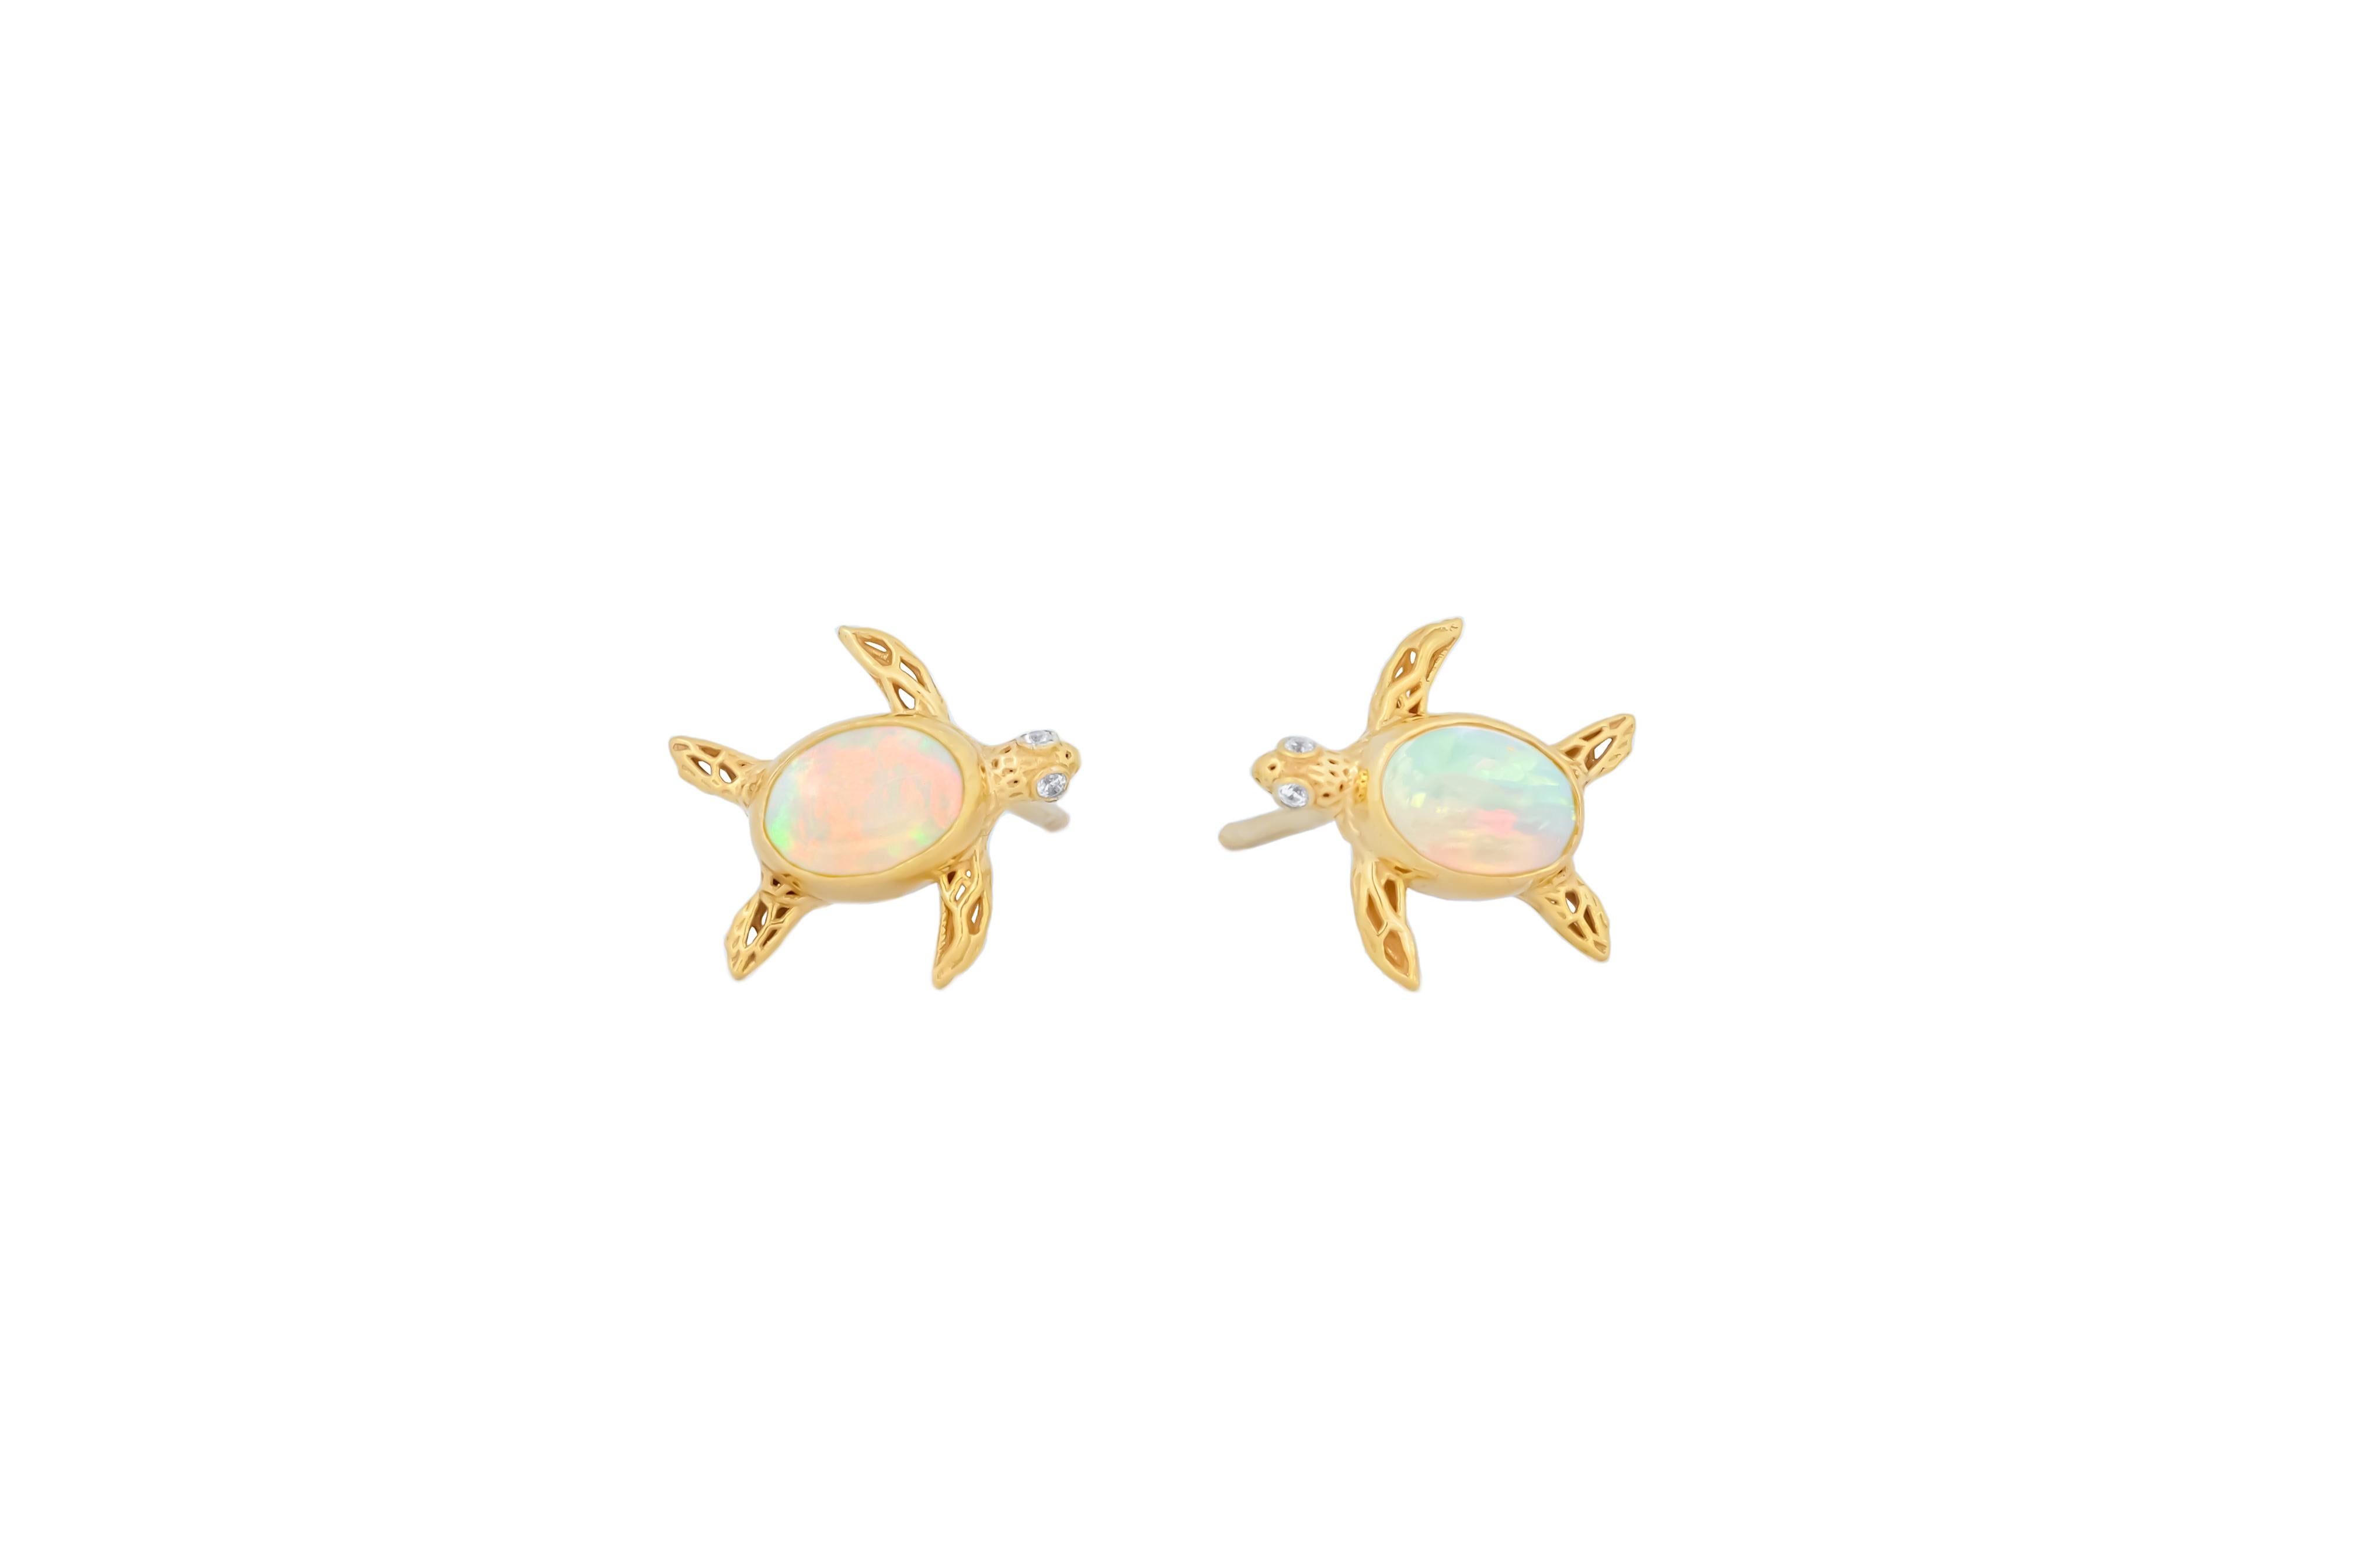 Modern Turtle earrings studs with opals in 14k gold.